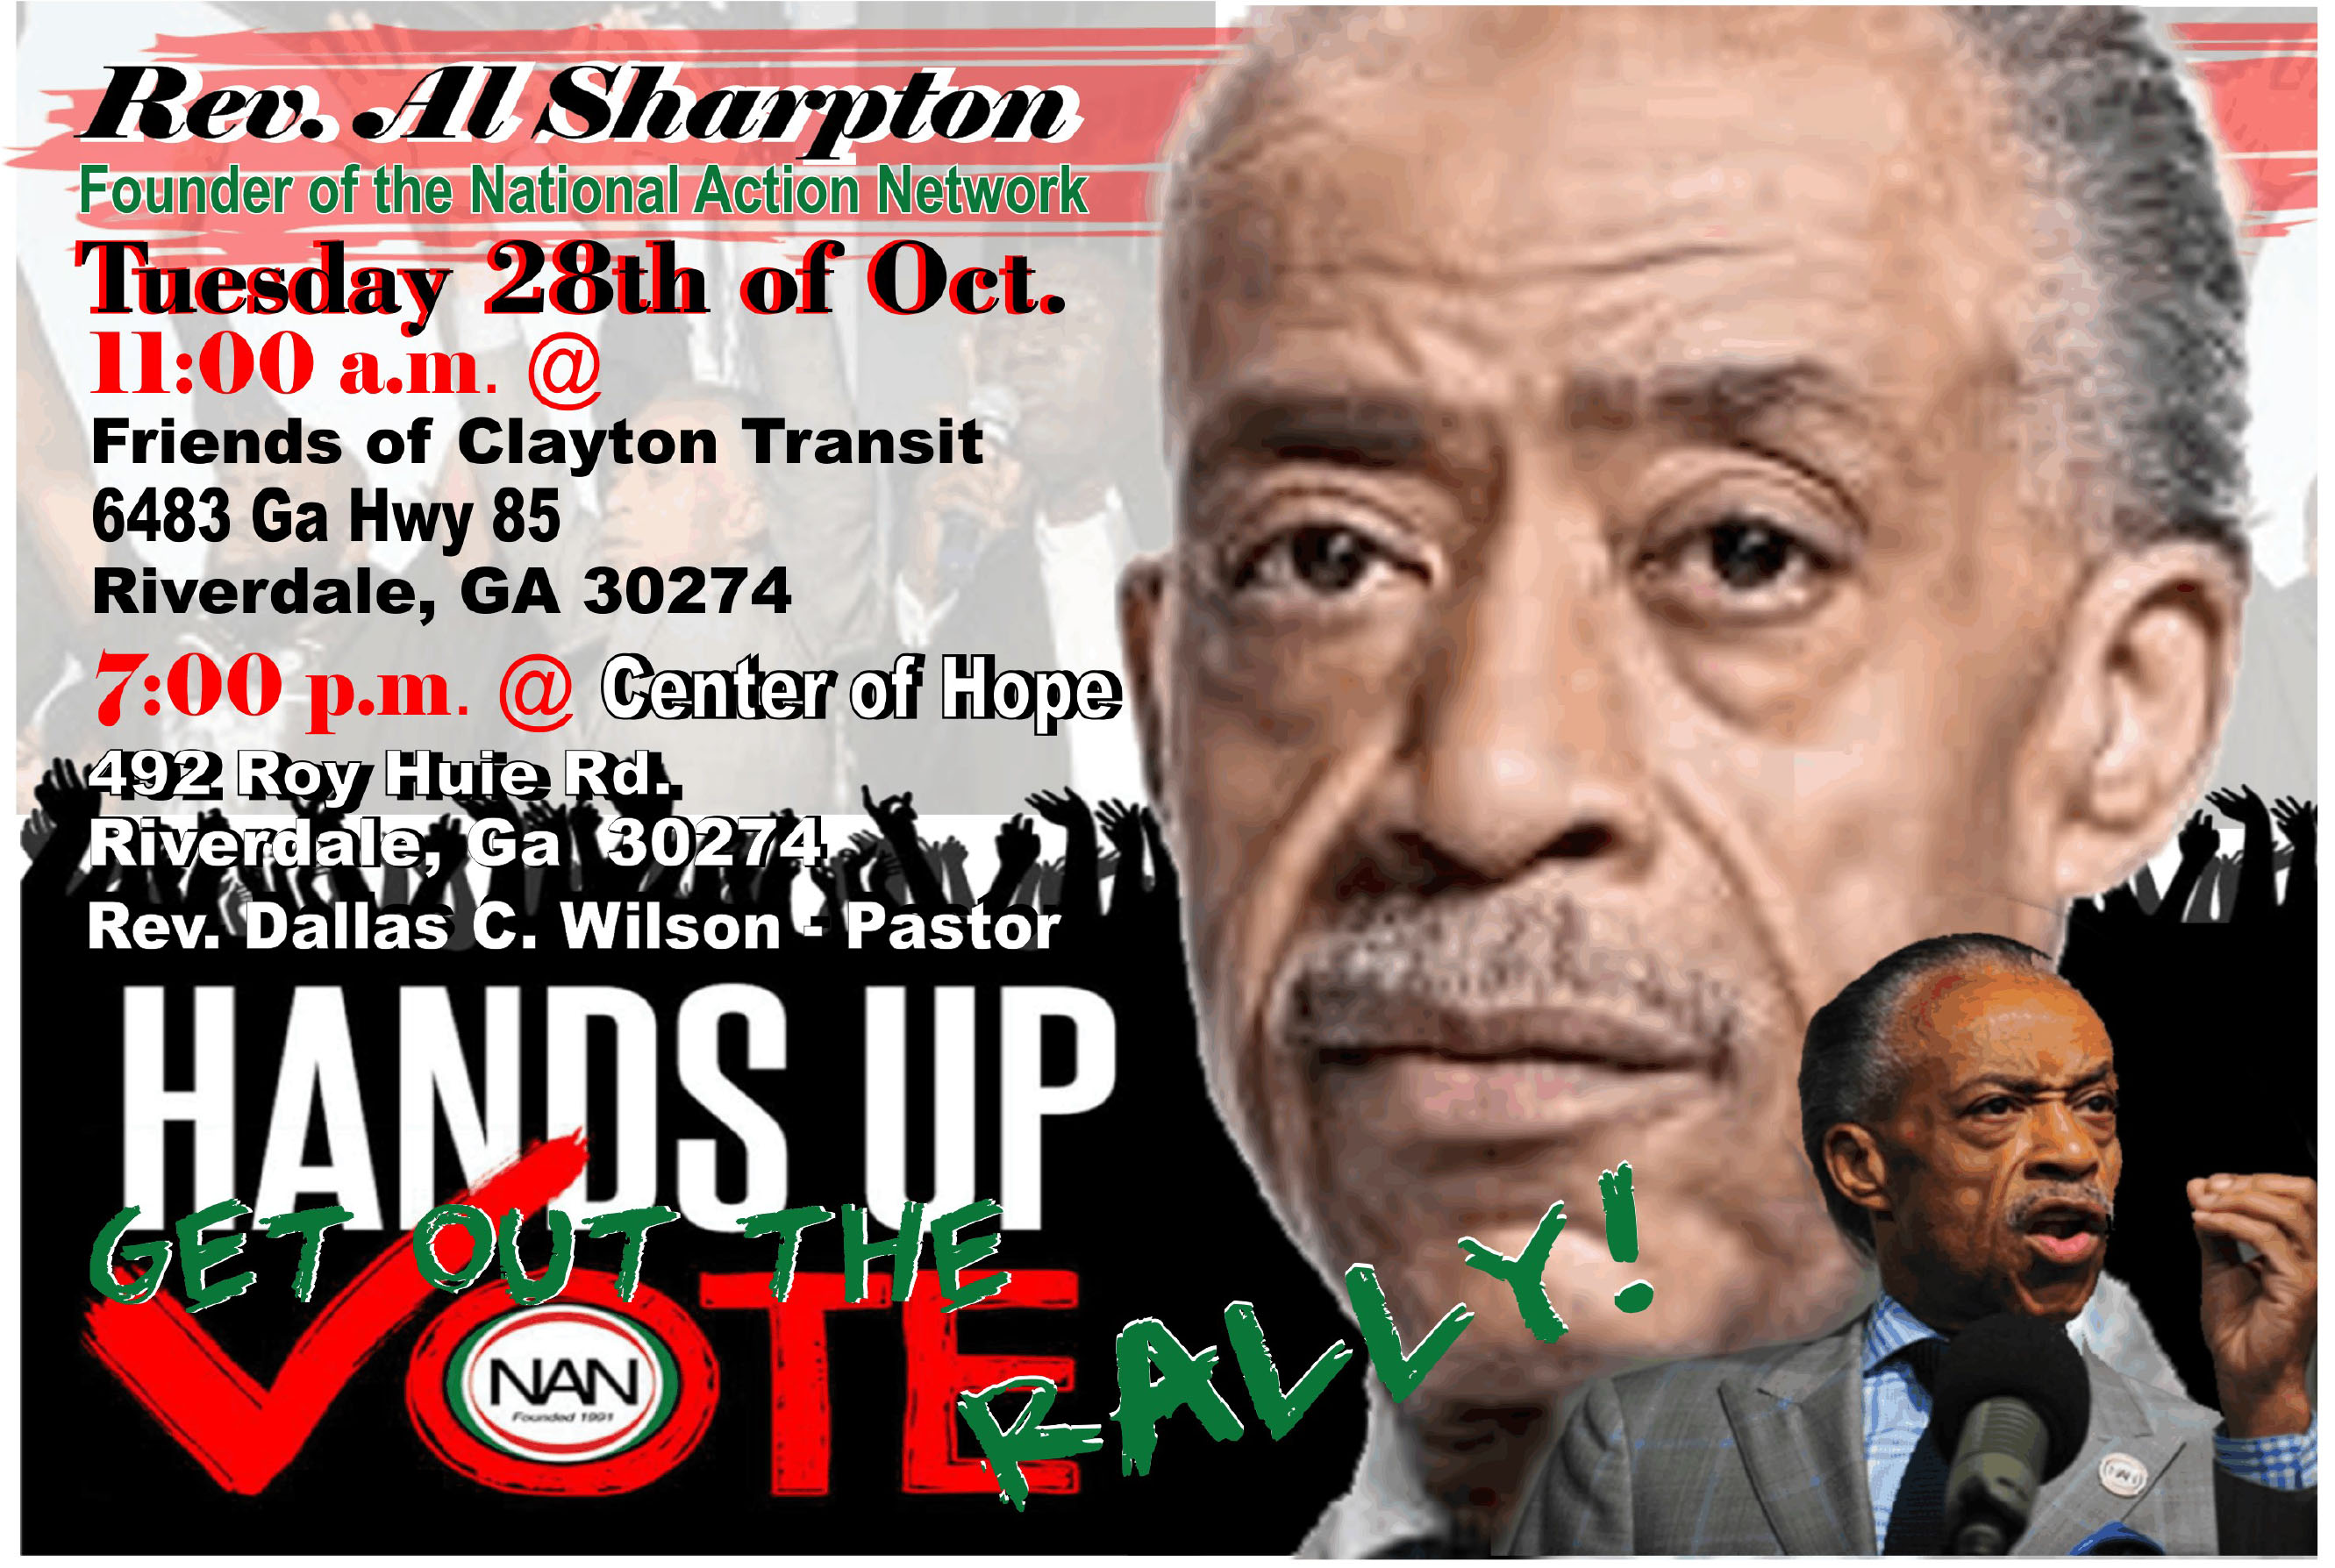 National Action Network Hands Up Vote Rally with Rev. Al Sharpton Tues. OCt. 28th, 2014 7pm